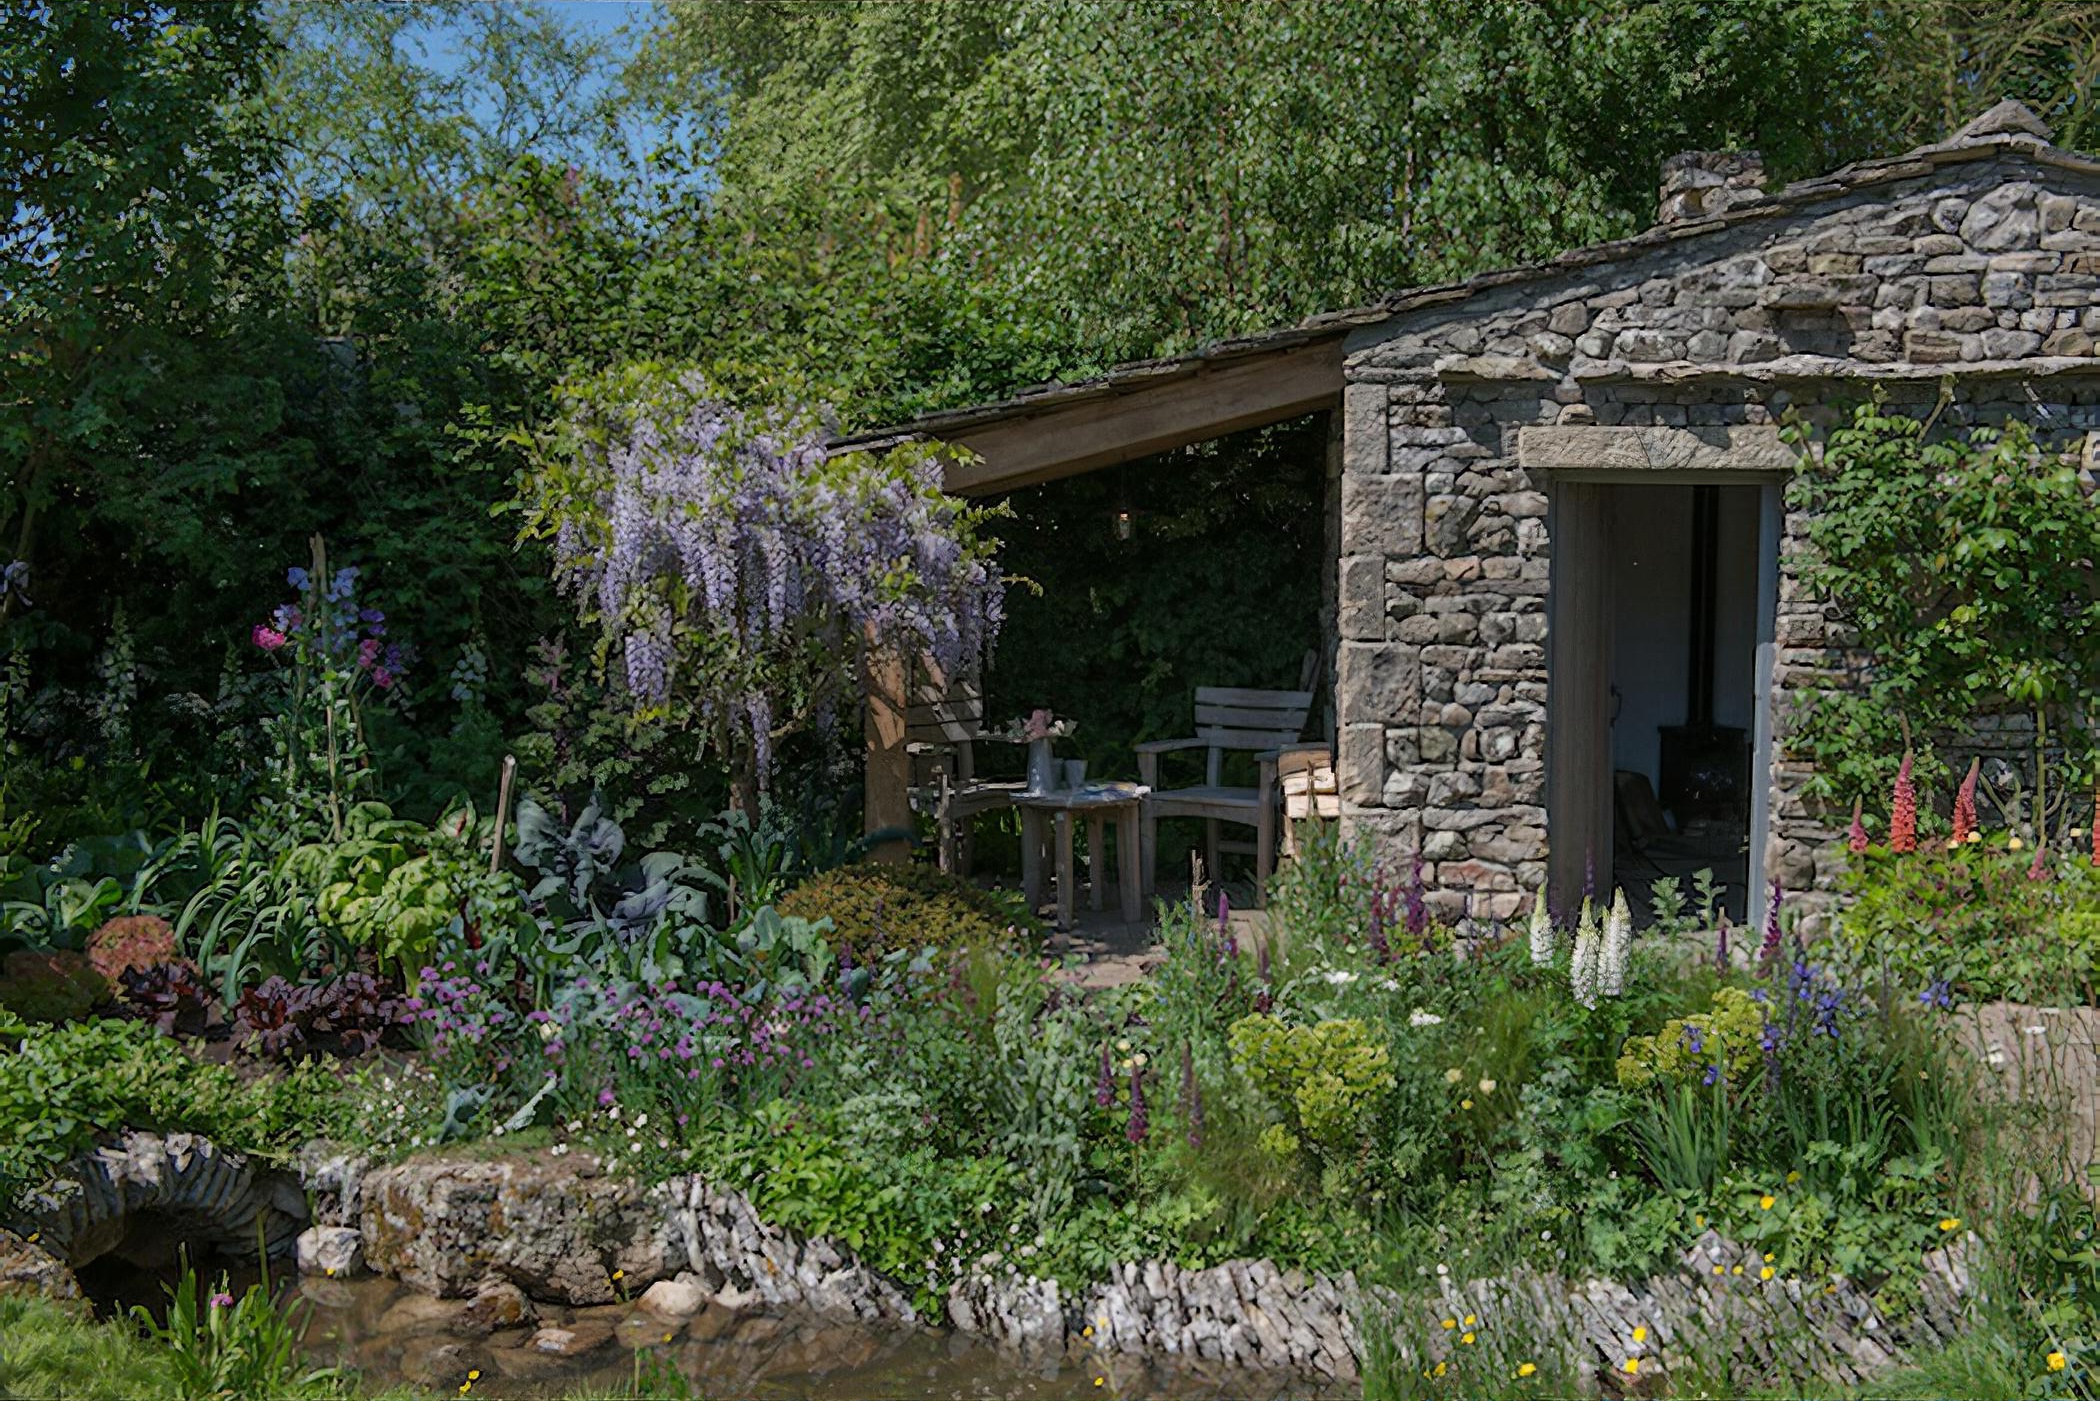 The Welcome to Yorkshire Garden Chelsea Flower Show 2018 by garden designer and landscaper Mark Gregory